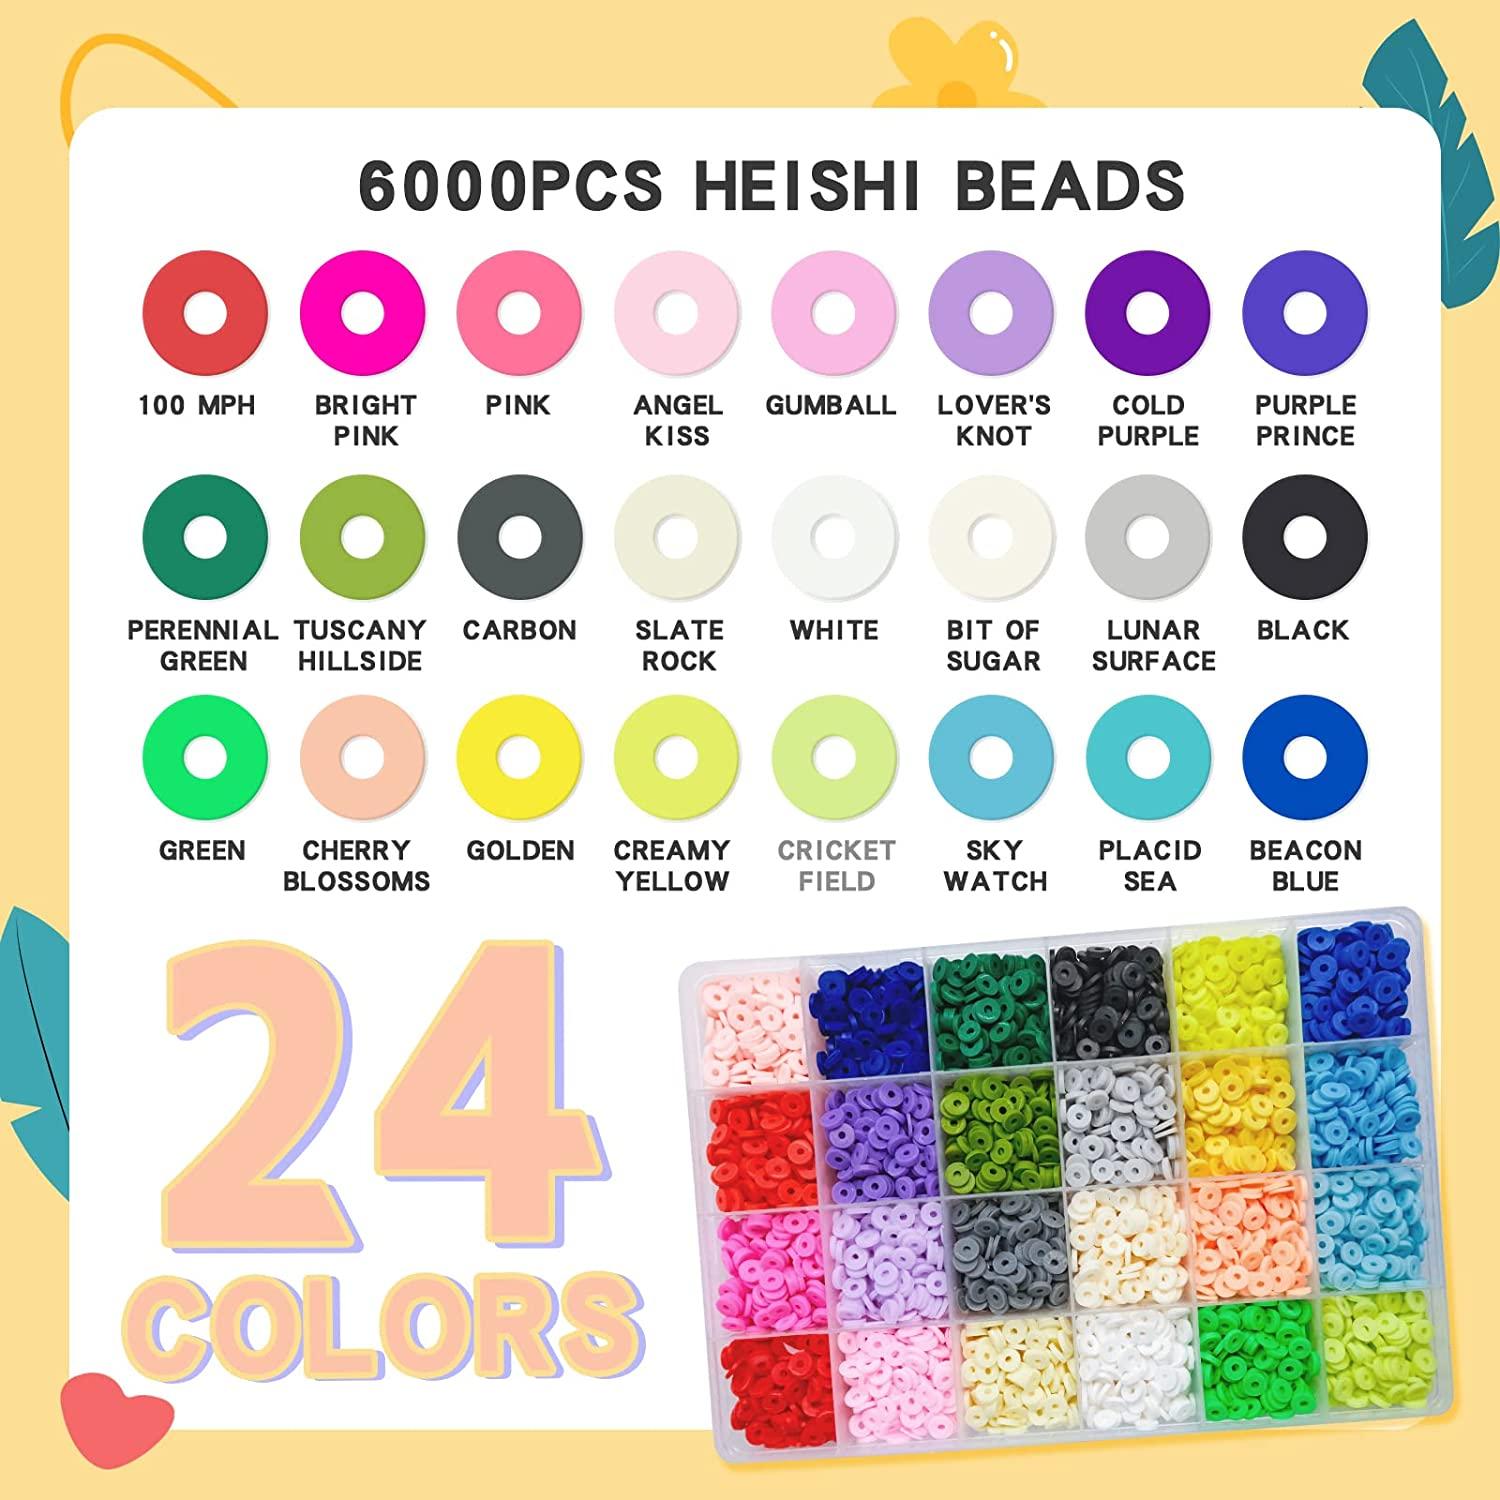 6000 pcs Clay Beads for Bracelets Making, Clay Heishi Beads Jewelry Making  Kit with Glass Seed Beads Spacer Smiley Face Beads Letter Beads, Elastic